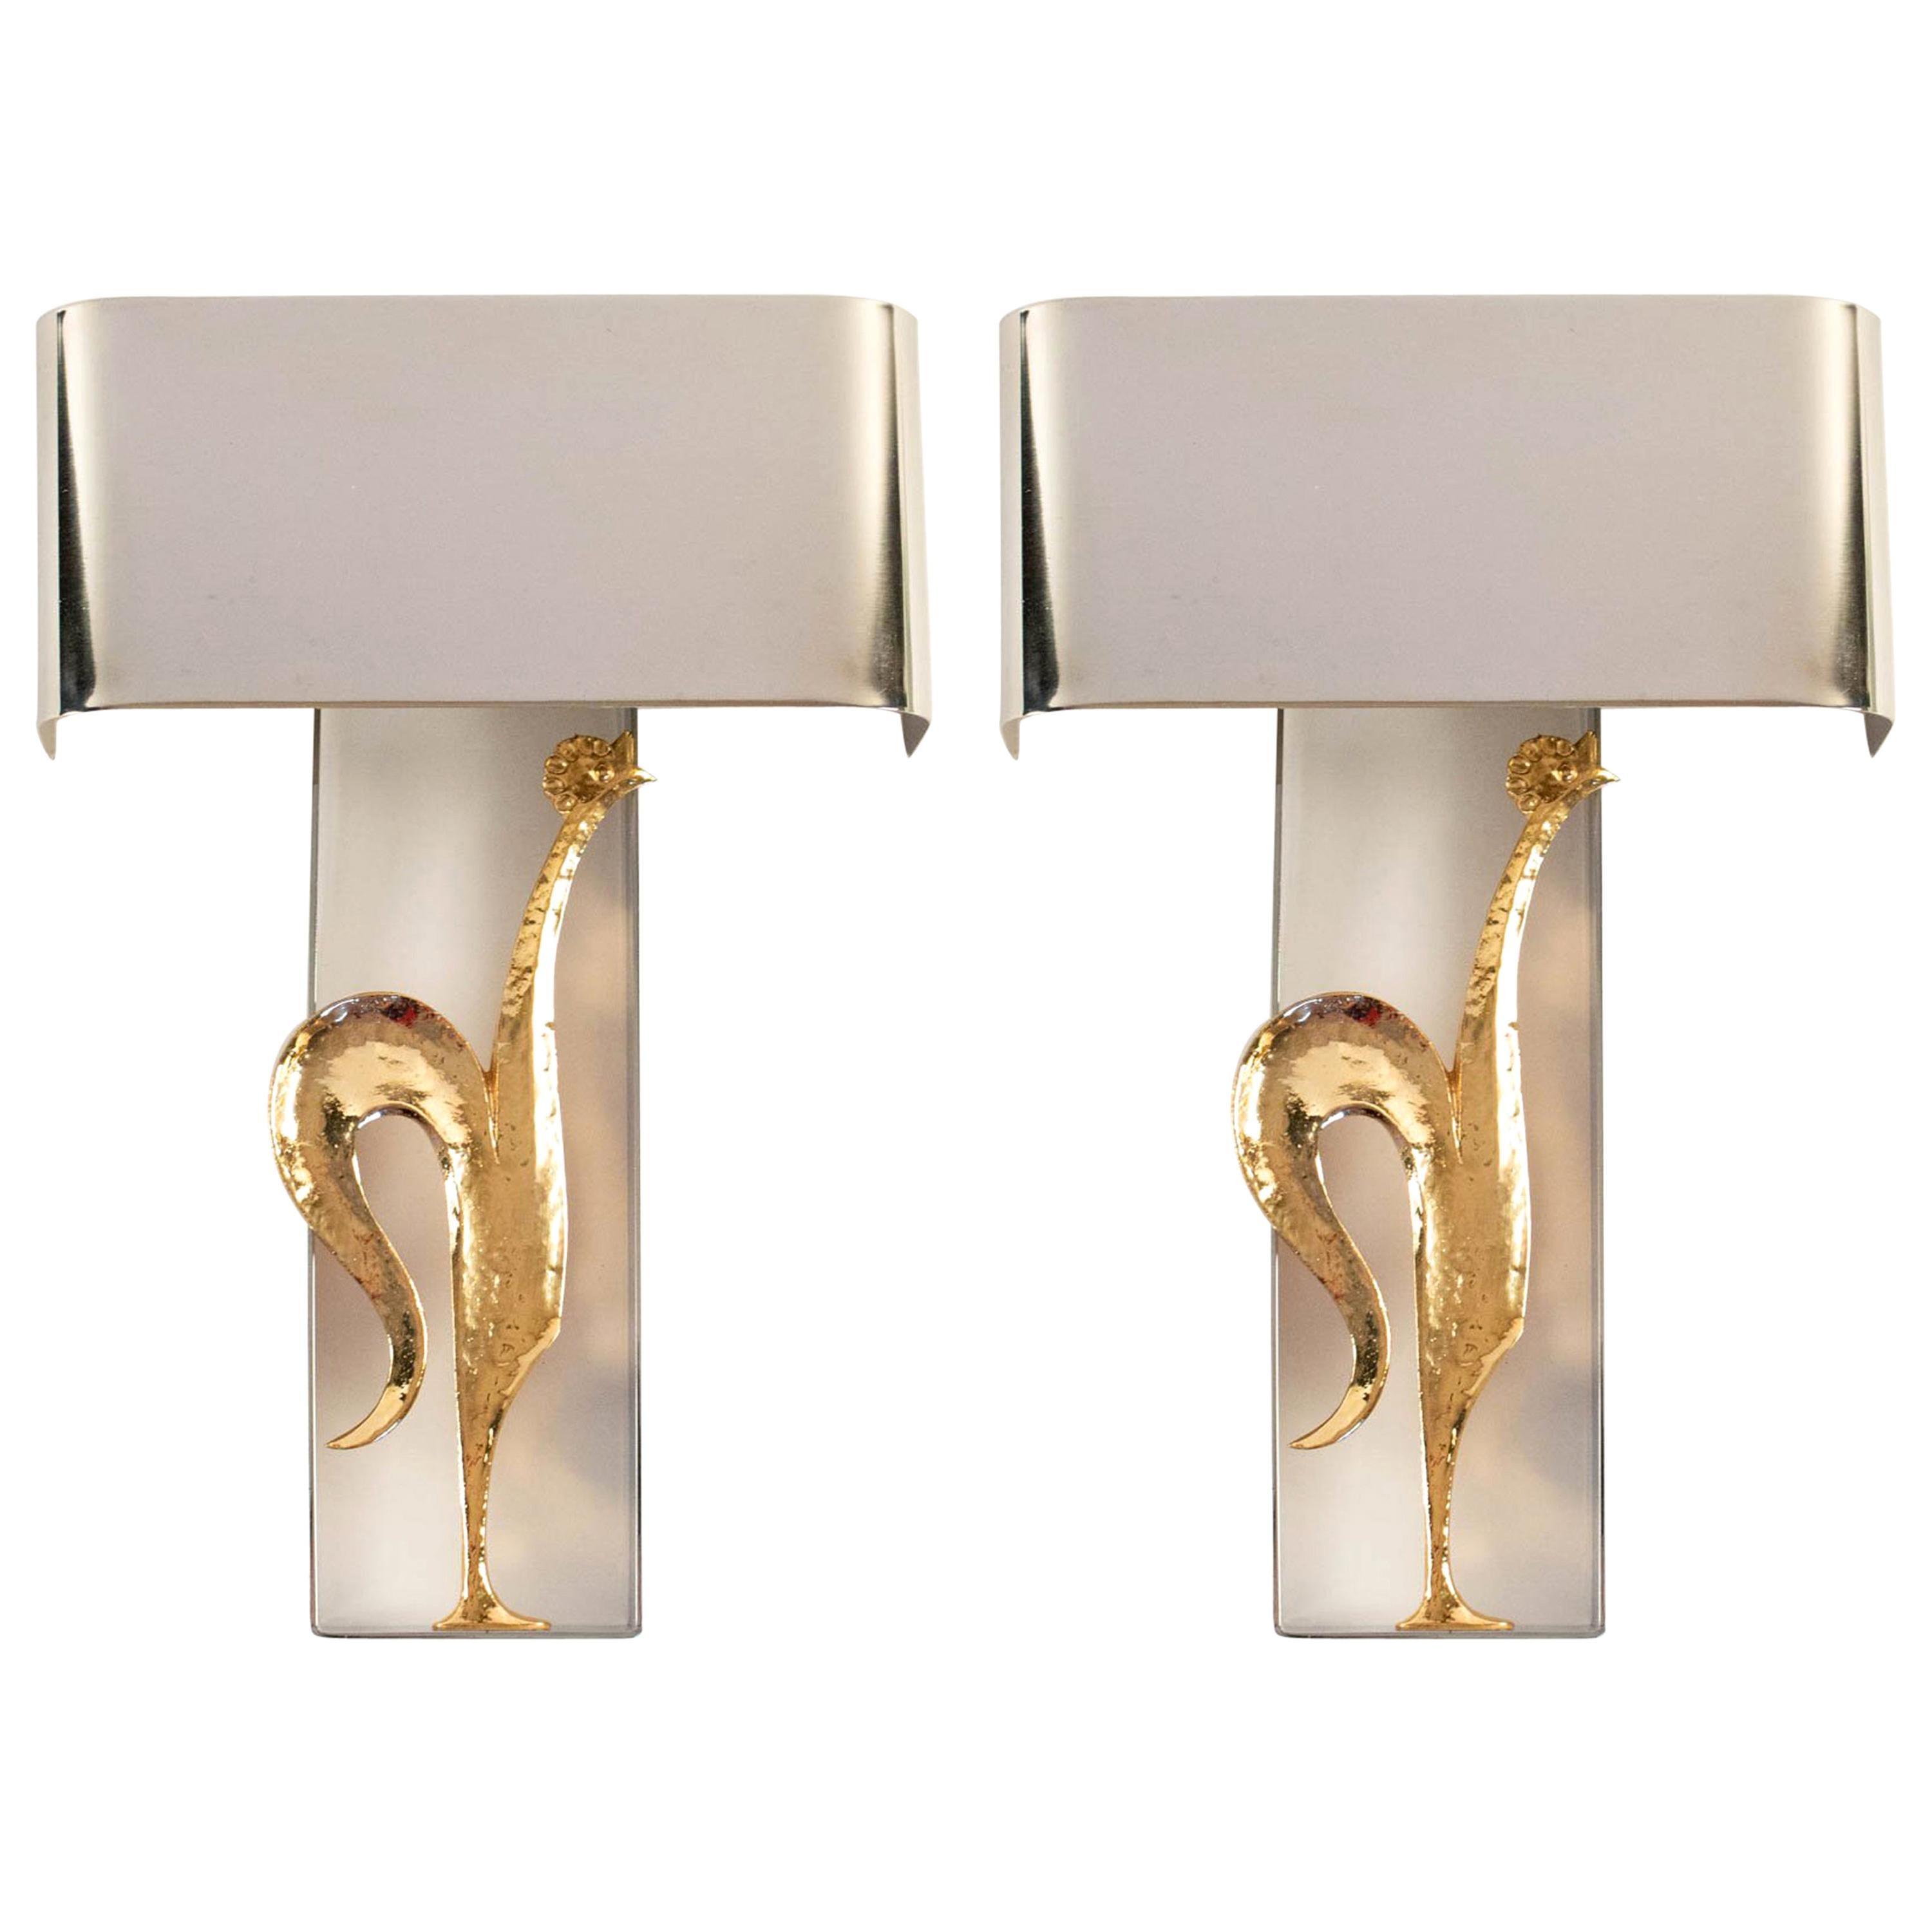 1960 Pair of gilt bronze and silvered sconces from the Maison Charles.